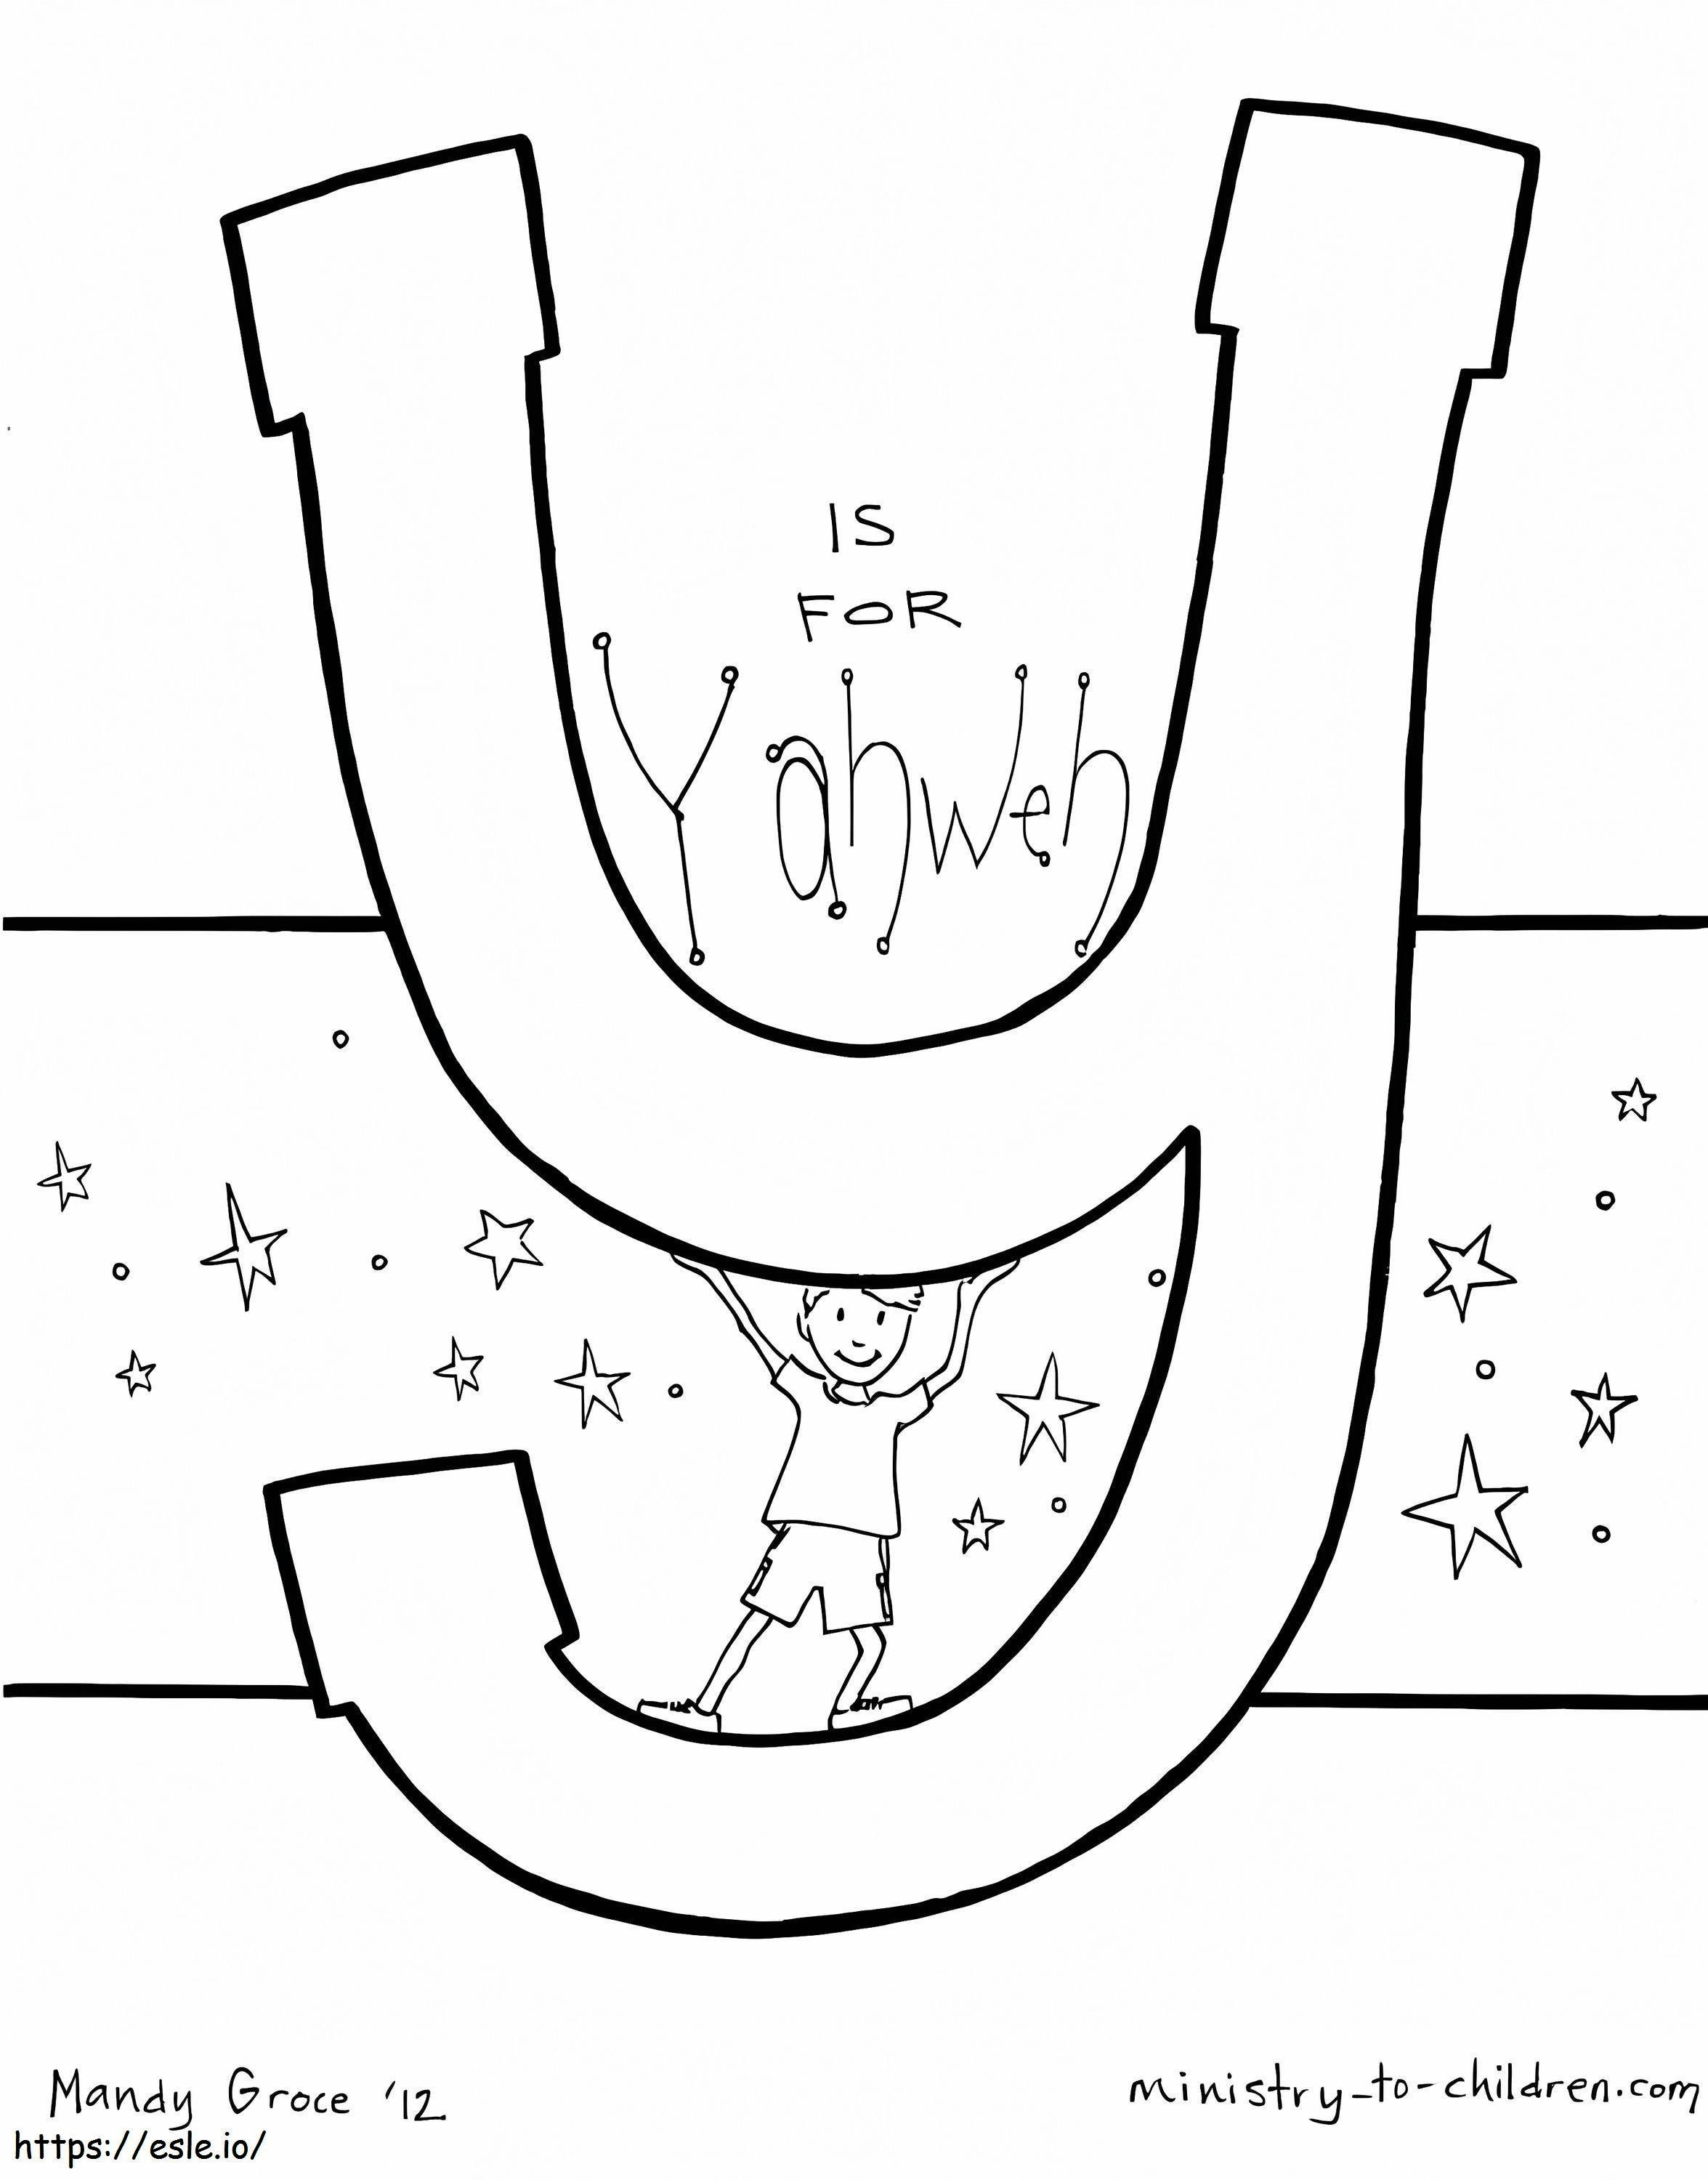 Y Is For Yahweh coloring page